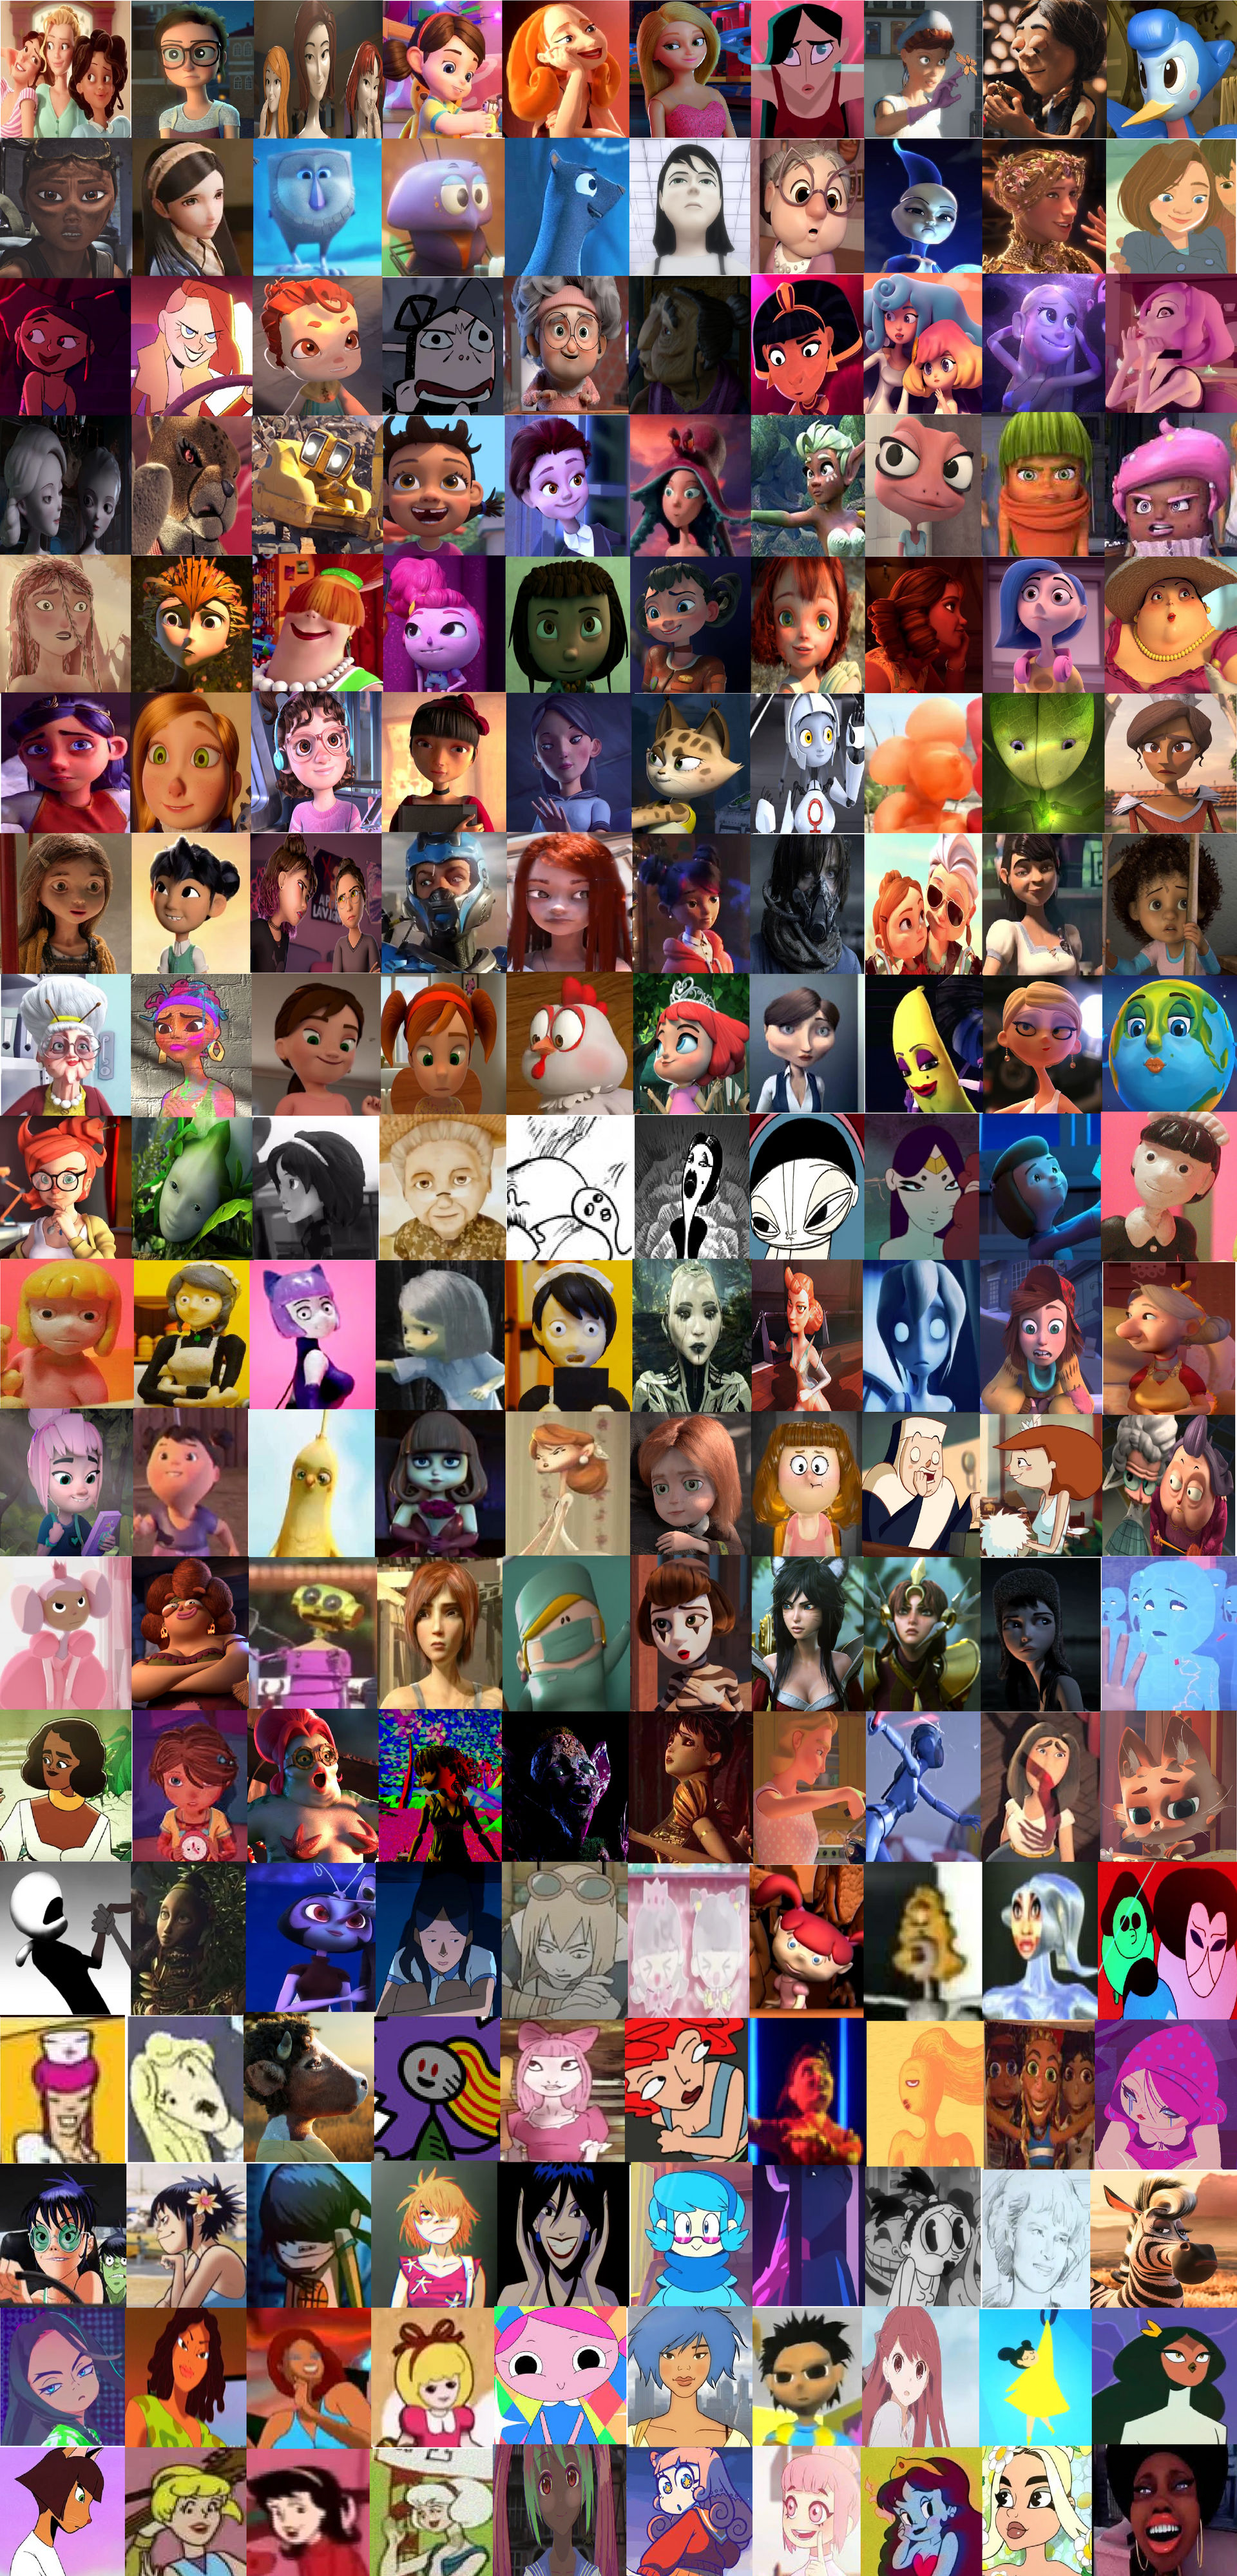 Animated Heroines 25 by Blossomgutz on DeviantArt